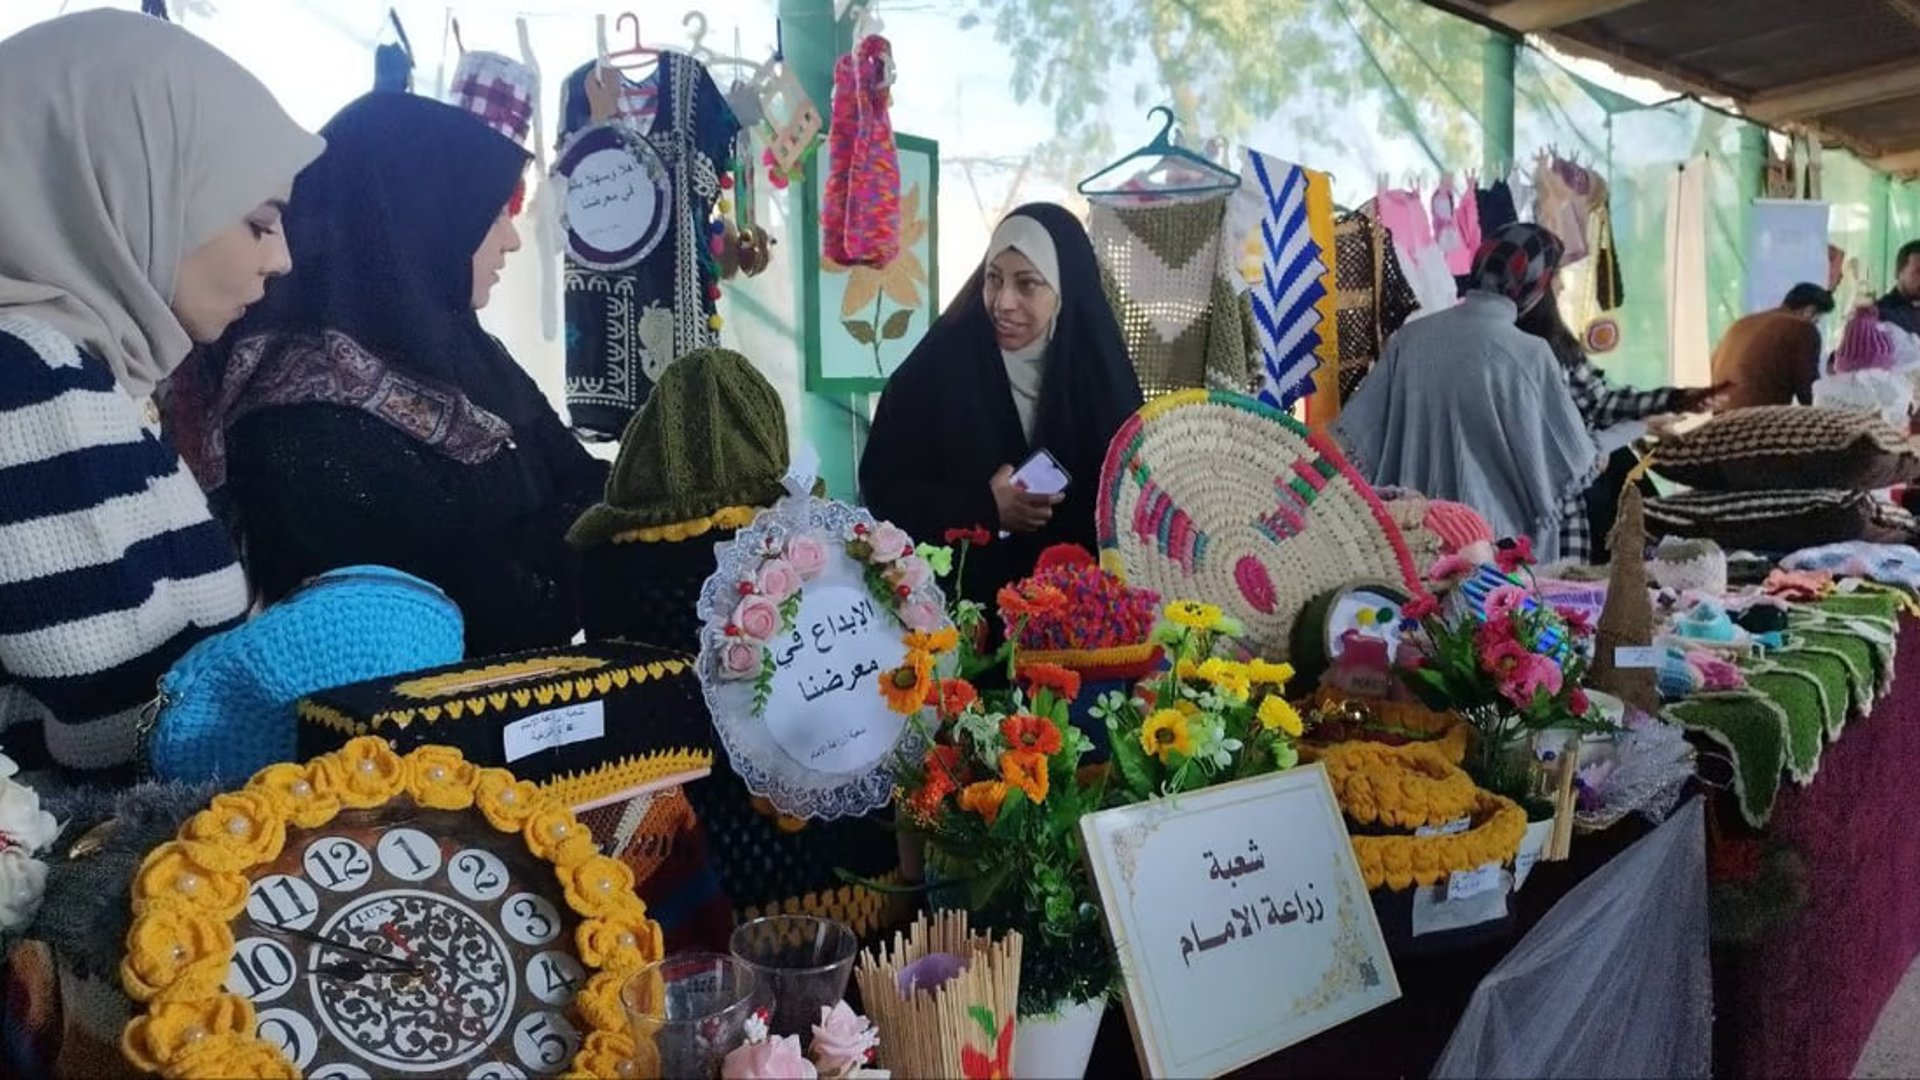 Rural womens exhibition showcases handicrafts and folklore in Babil